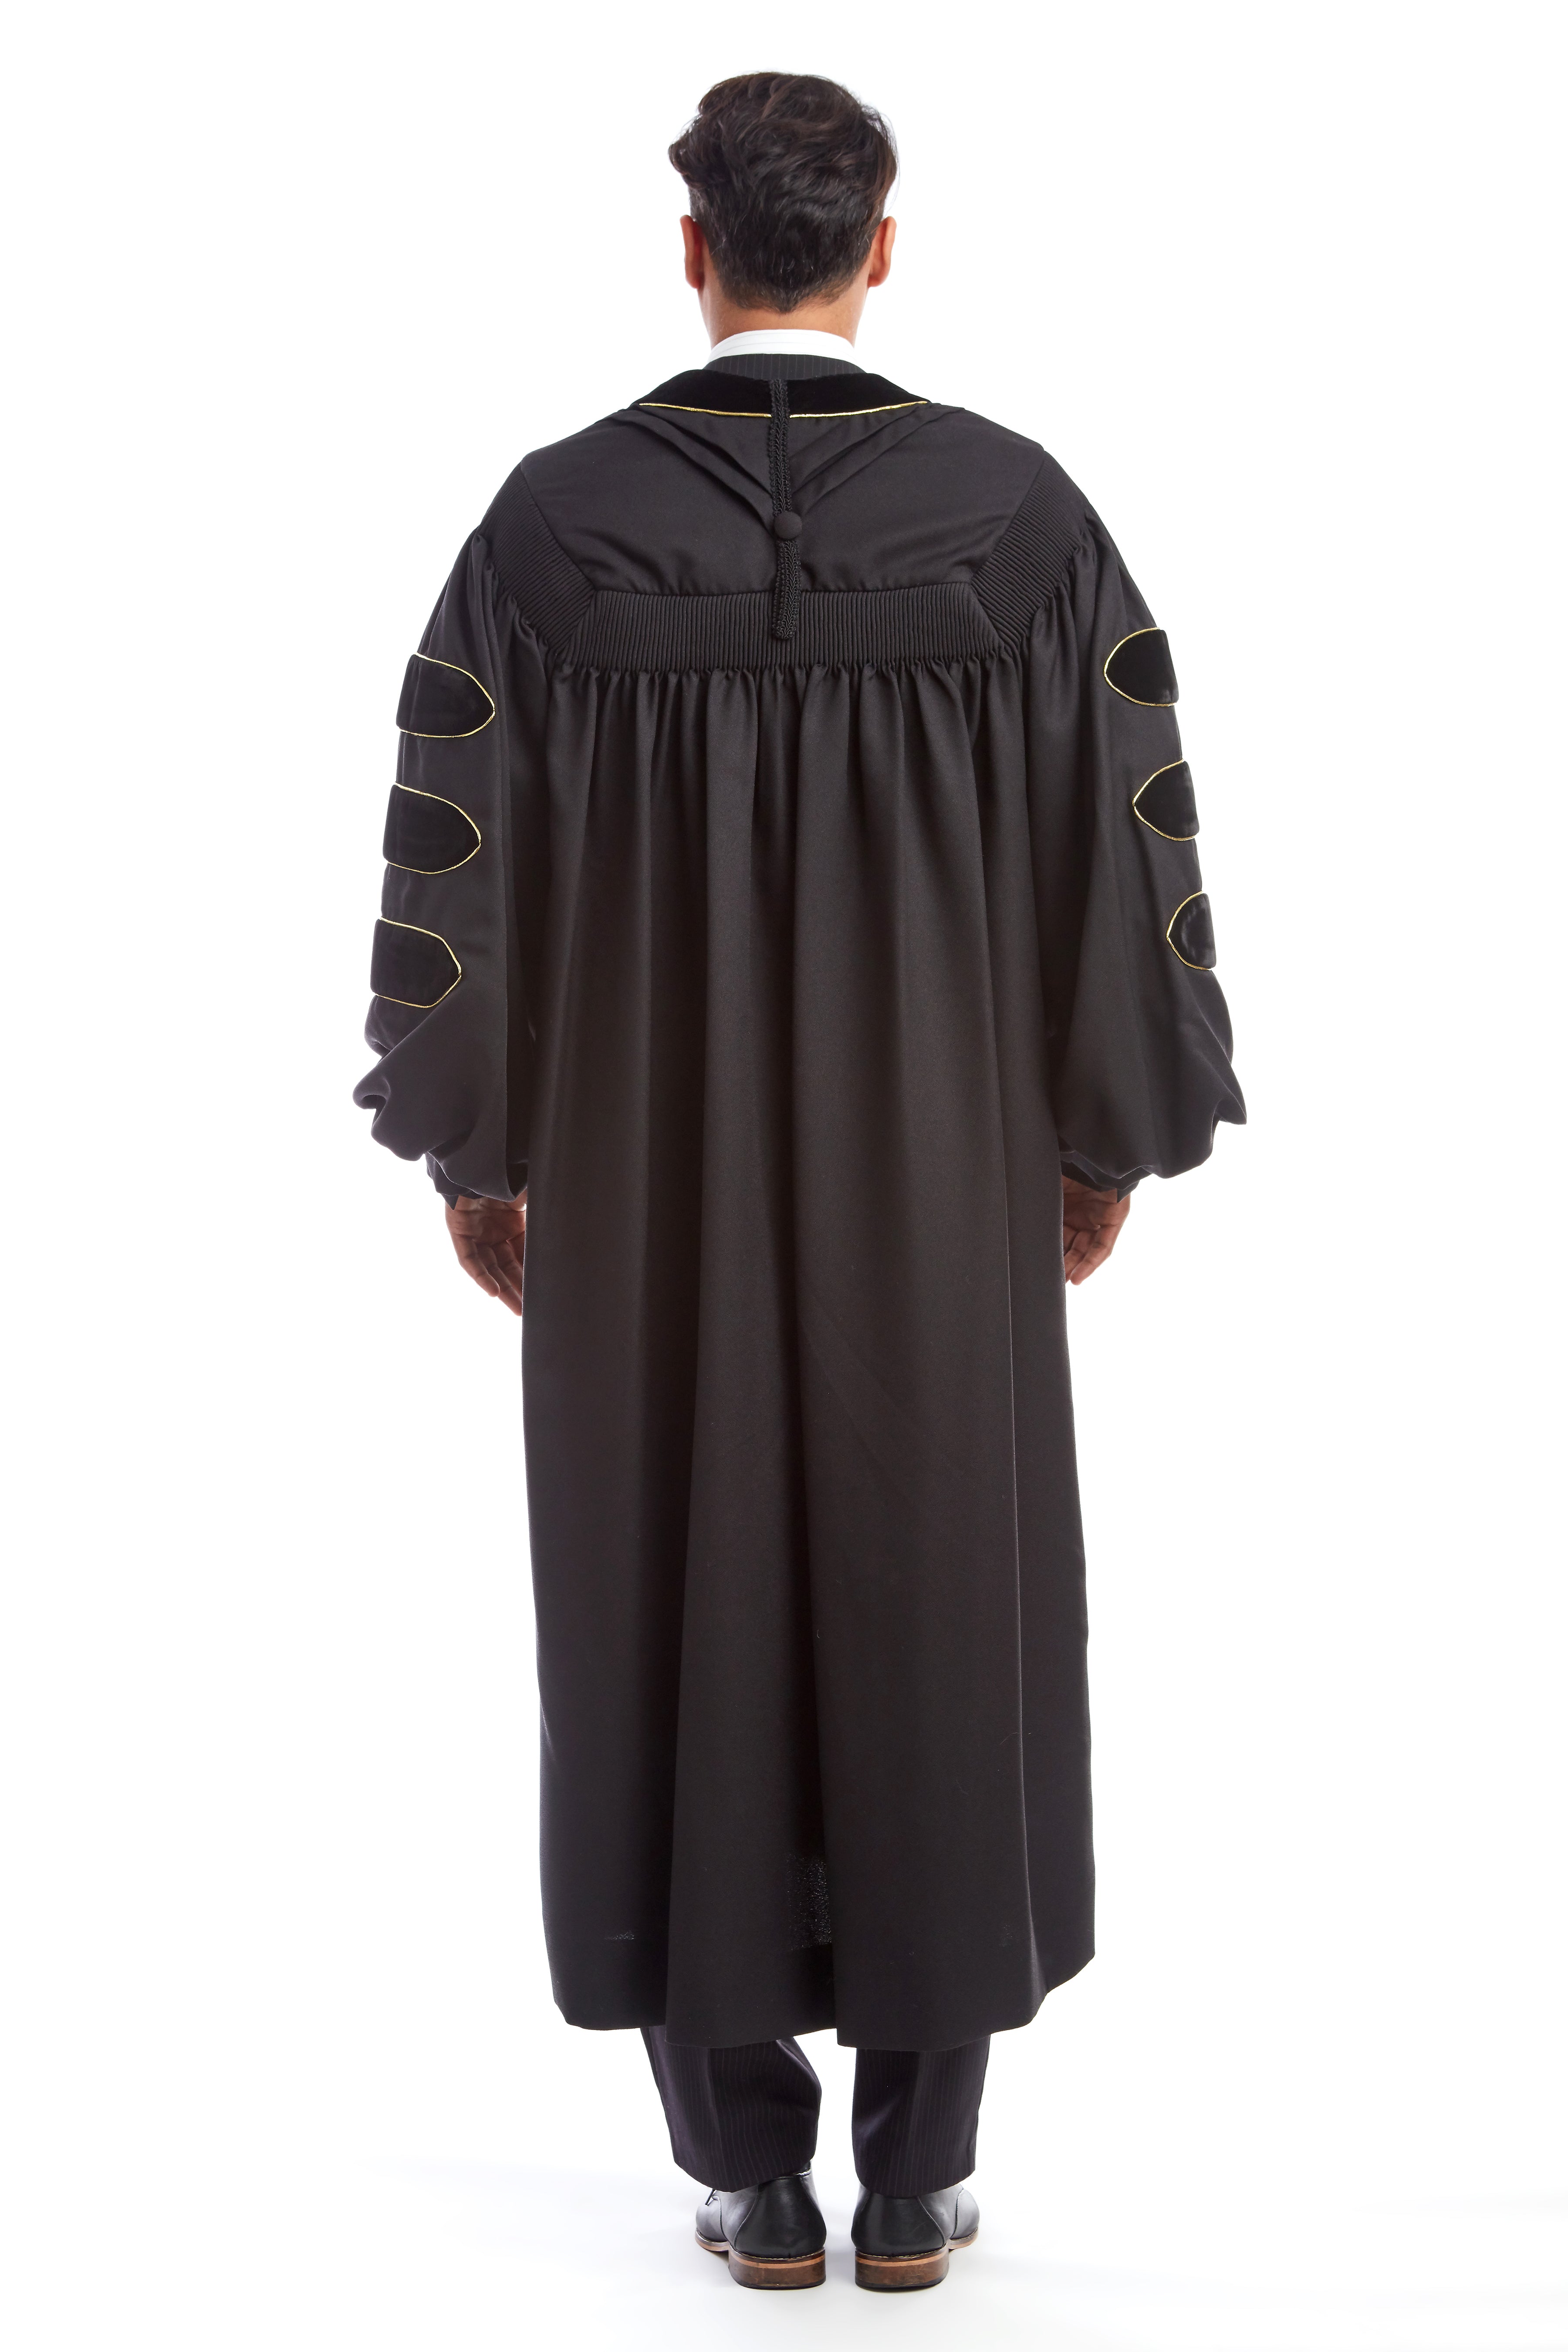 Premium Black Doctoral Gown with Gold Piping for Graduation 